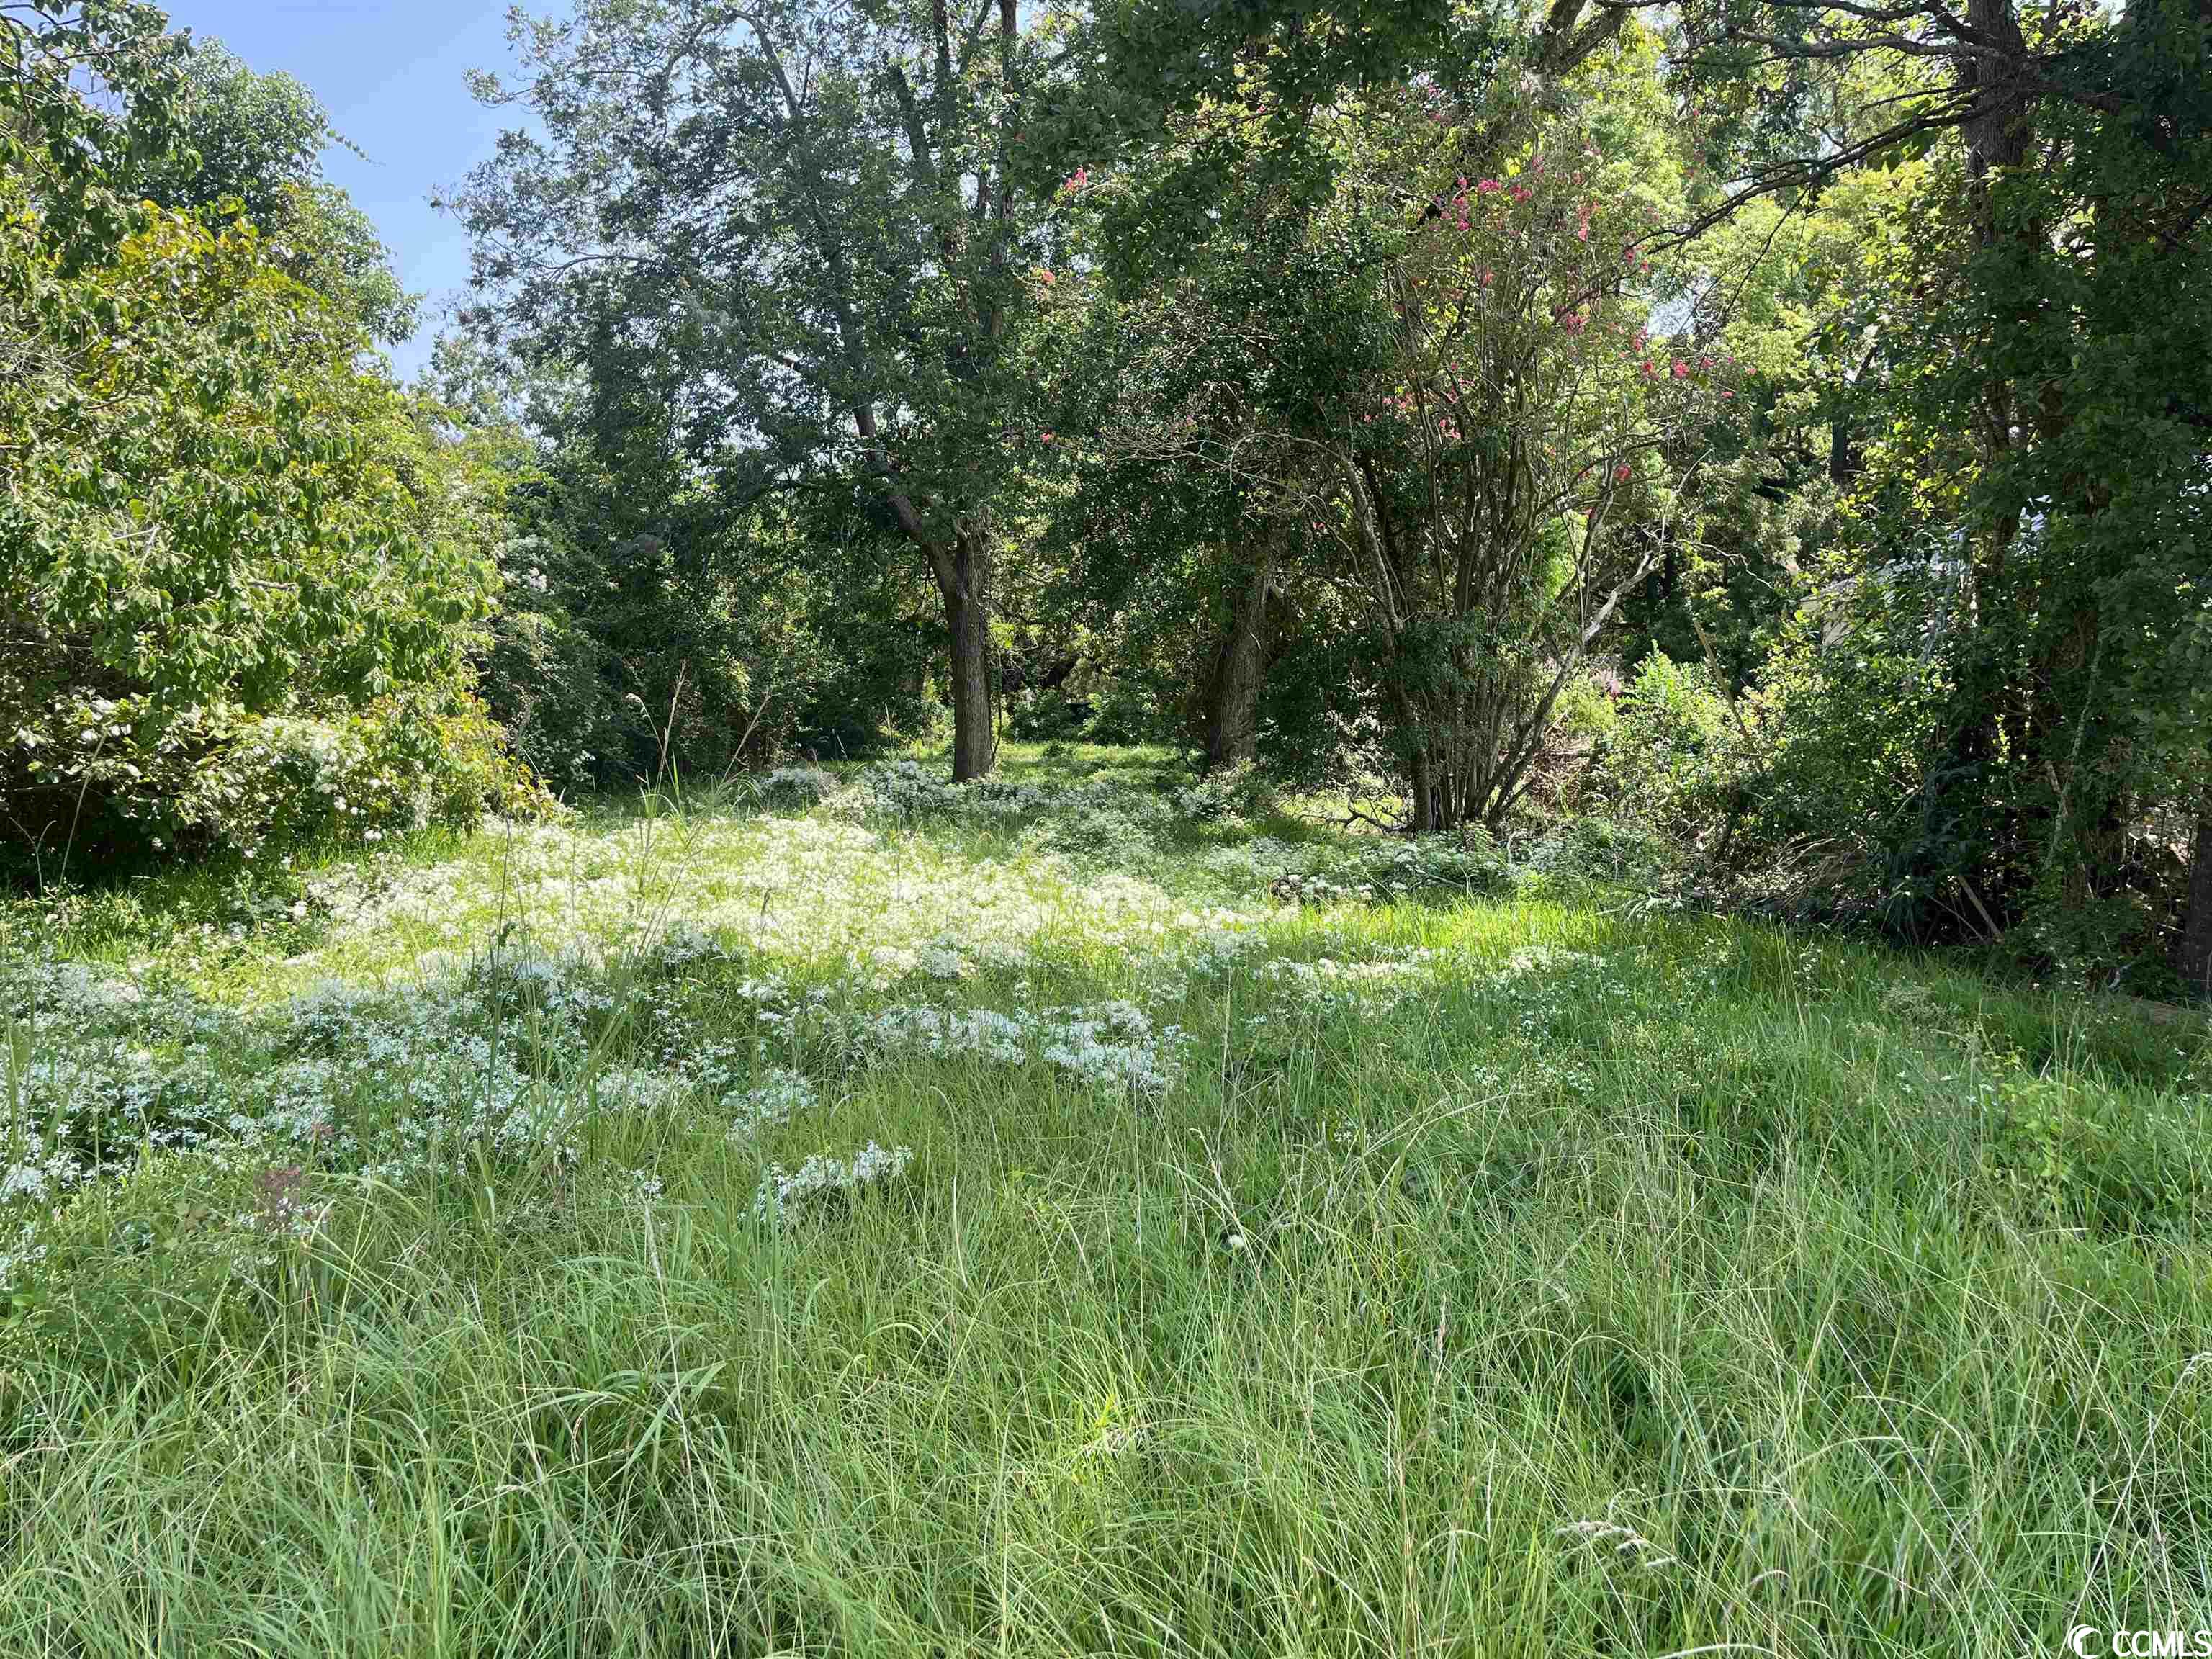 residential lot located in the city of georgetown. buyer is responsible for verifying utilities, improvements, and measurements. mobile homes not allowed. buyer can get survey if they desire. located just minutes from downtown georgetown with all the shopping and dining georgetown has to offer.